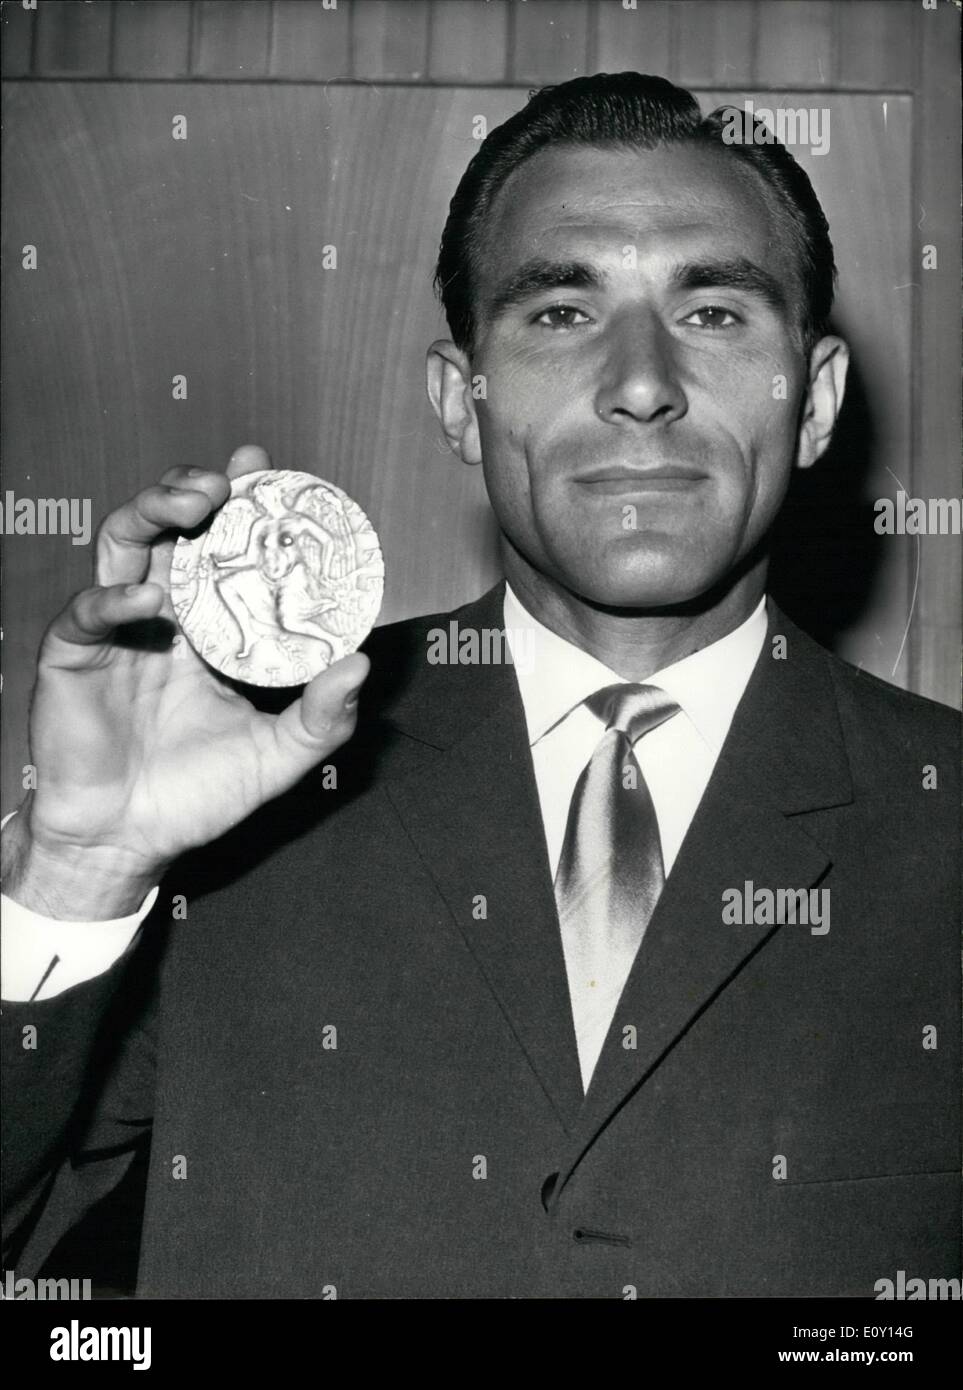 May 05, 1968 - Hungarian Tennis Champion Awarded Fair Play Trophy: M. Maheu, Director General of Unesco, handed the International National Fair play Pierre De Coubertin Trophy to Hungarian Tennis Champion Istvan Gulya's for his perfect and gentlemanly  during the Hamburg Championships. Istvan Gulyas showing his trophy. Stock Photo